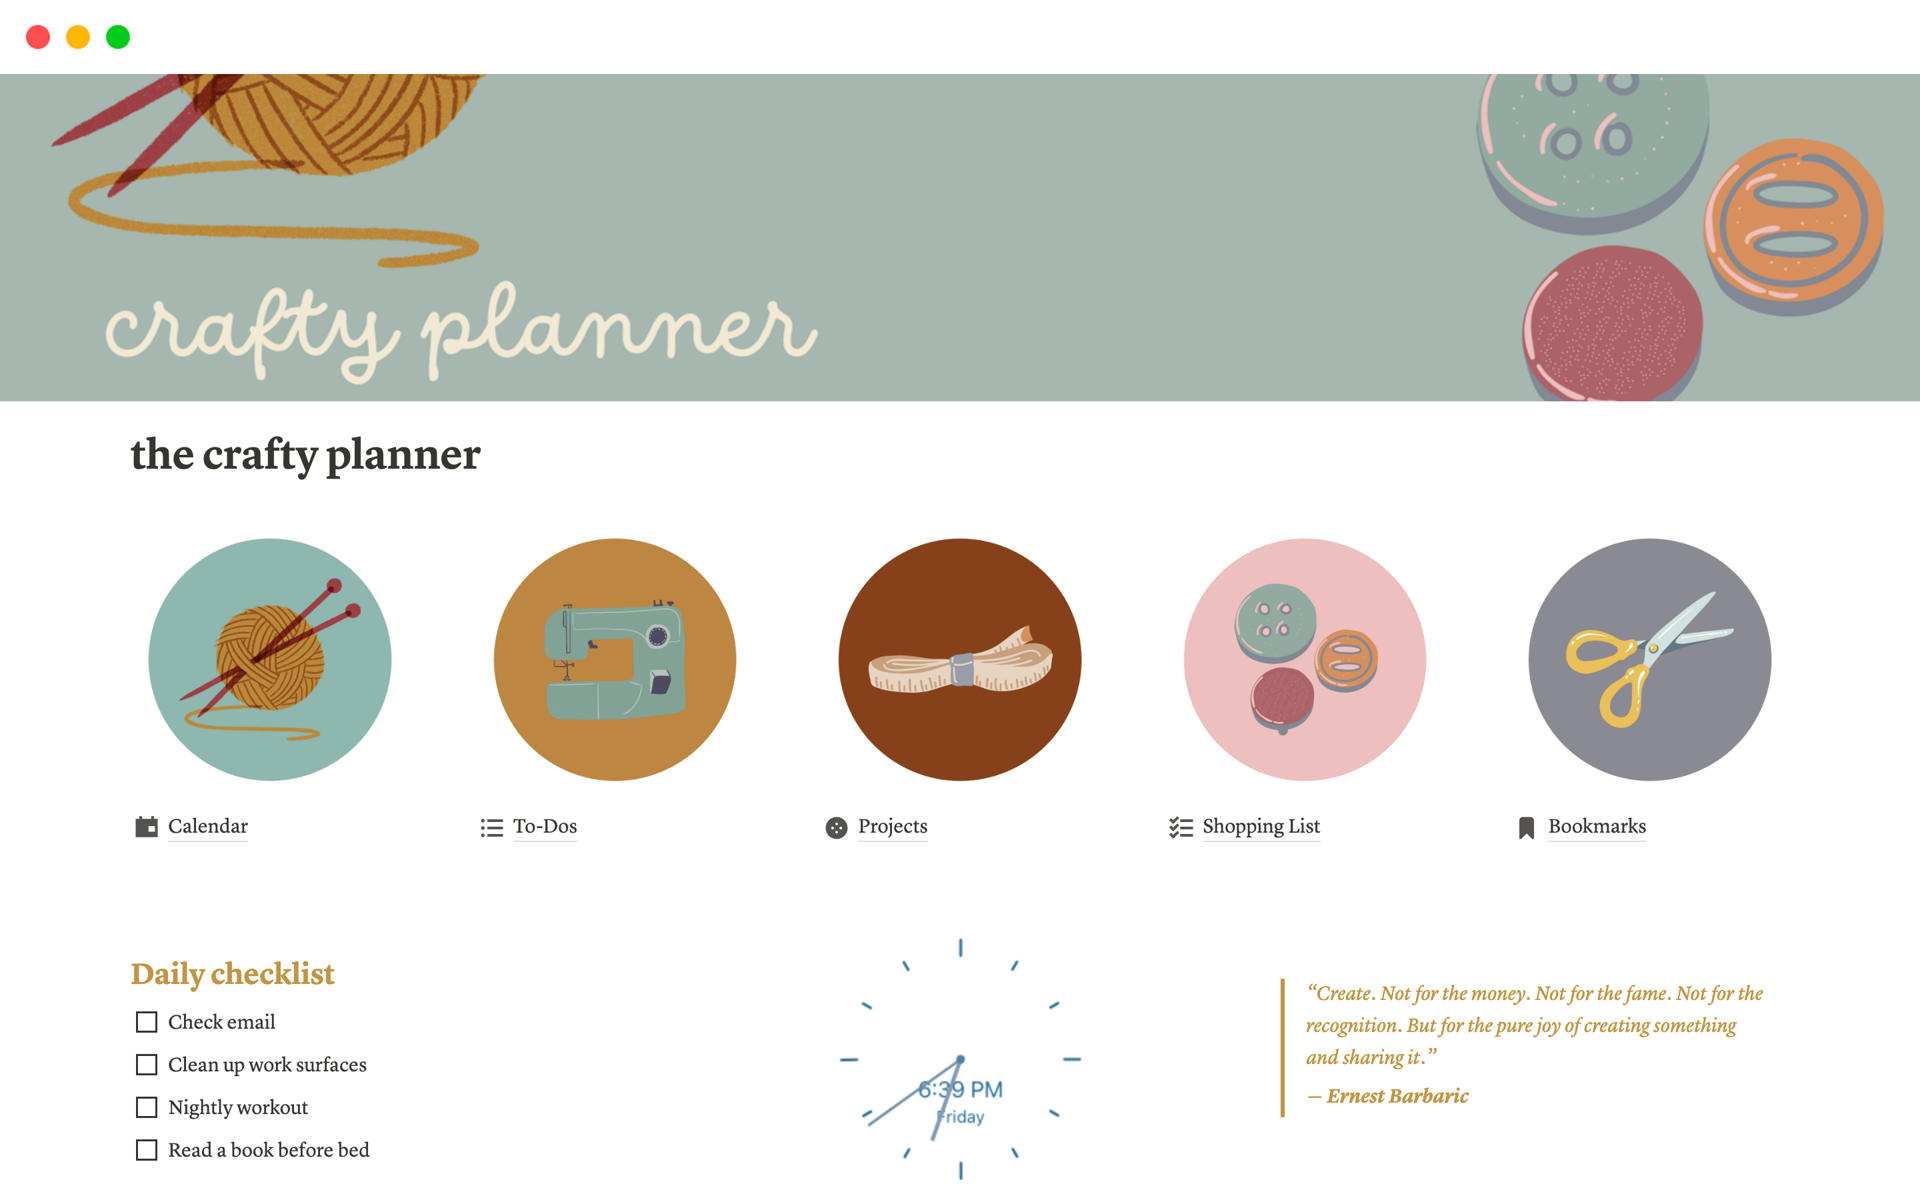 A simple planner for crafters, with themed graphics, a calendar and checklists, and a dedicated page for planning craft projects. 